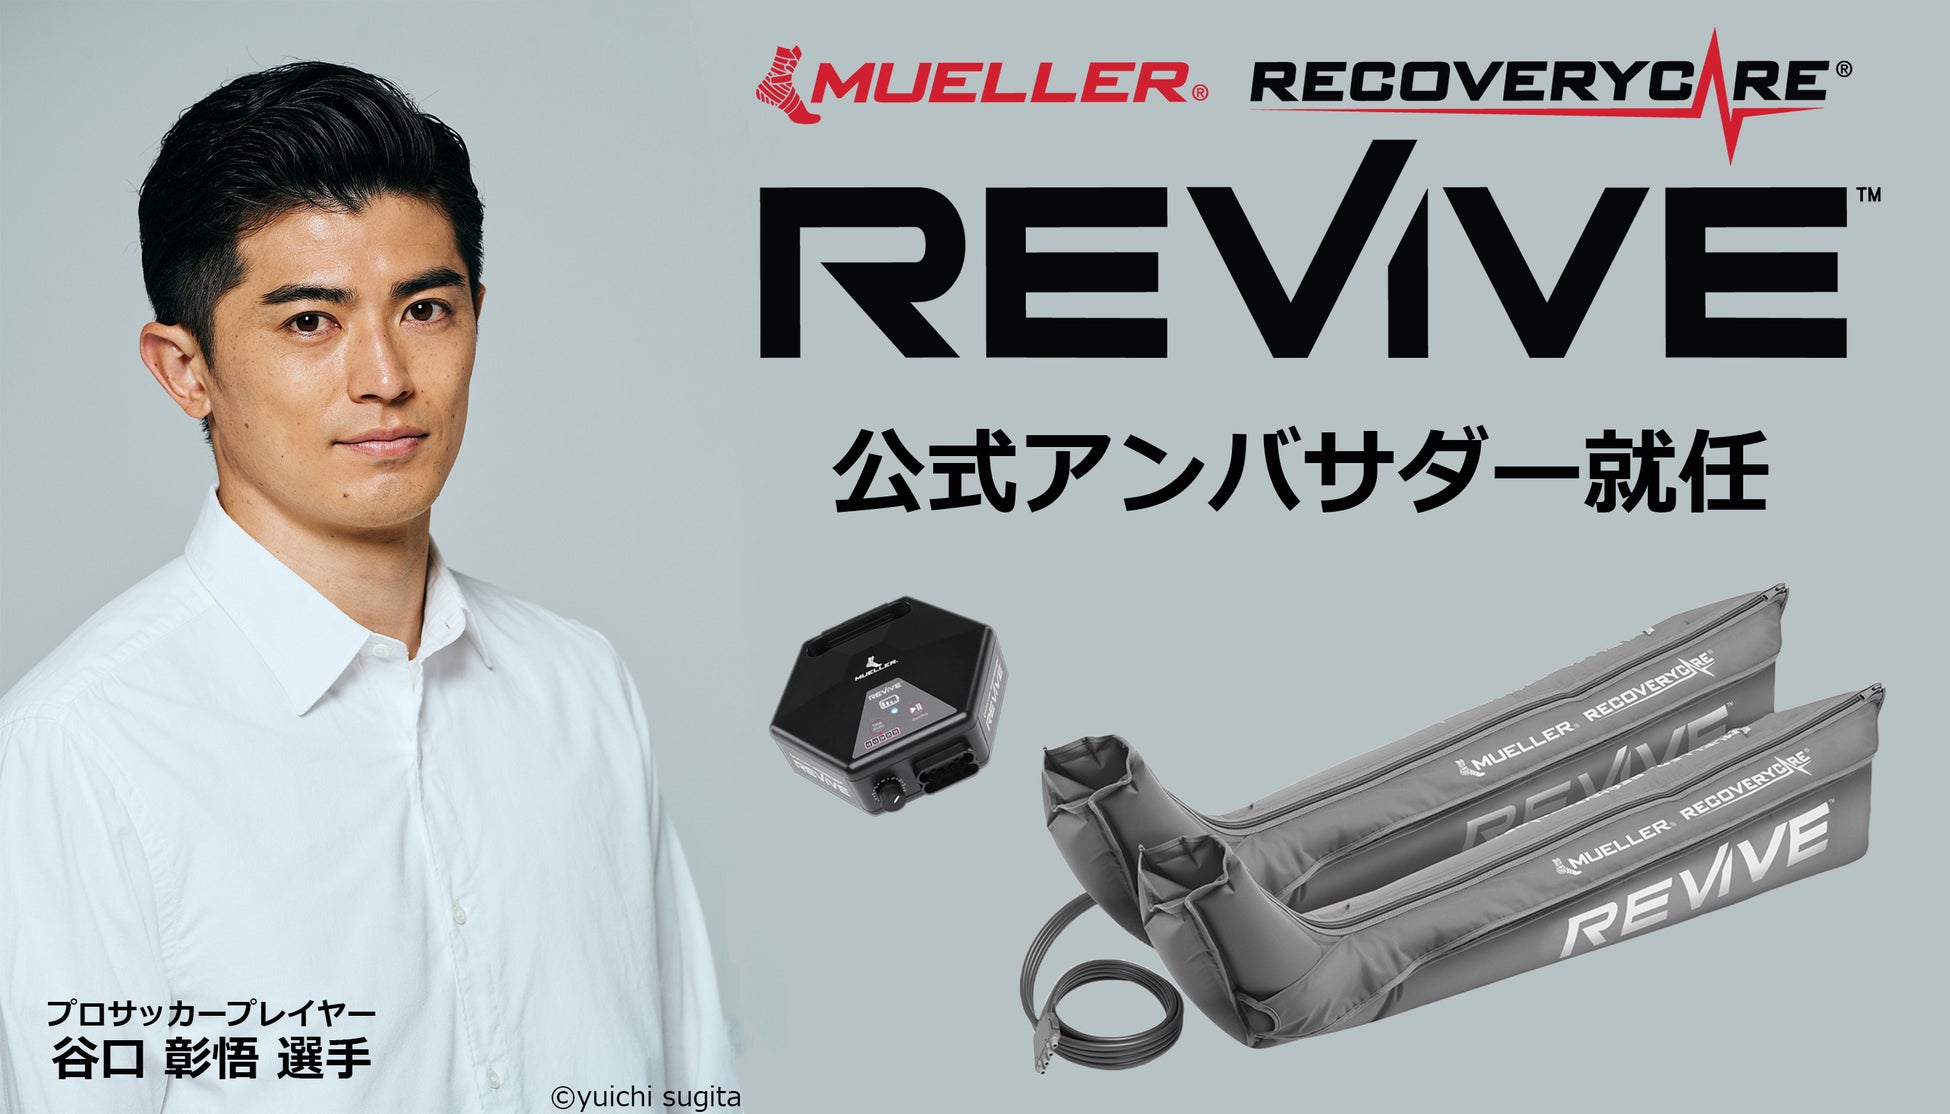 RecoveryCare REVIVE™　（リカバリーケア リヴァイブ）の公式アンバサダーに谷口彰悟選手が就任！